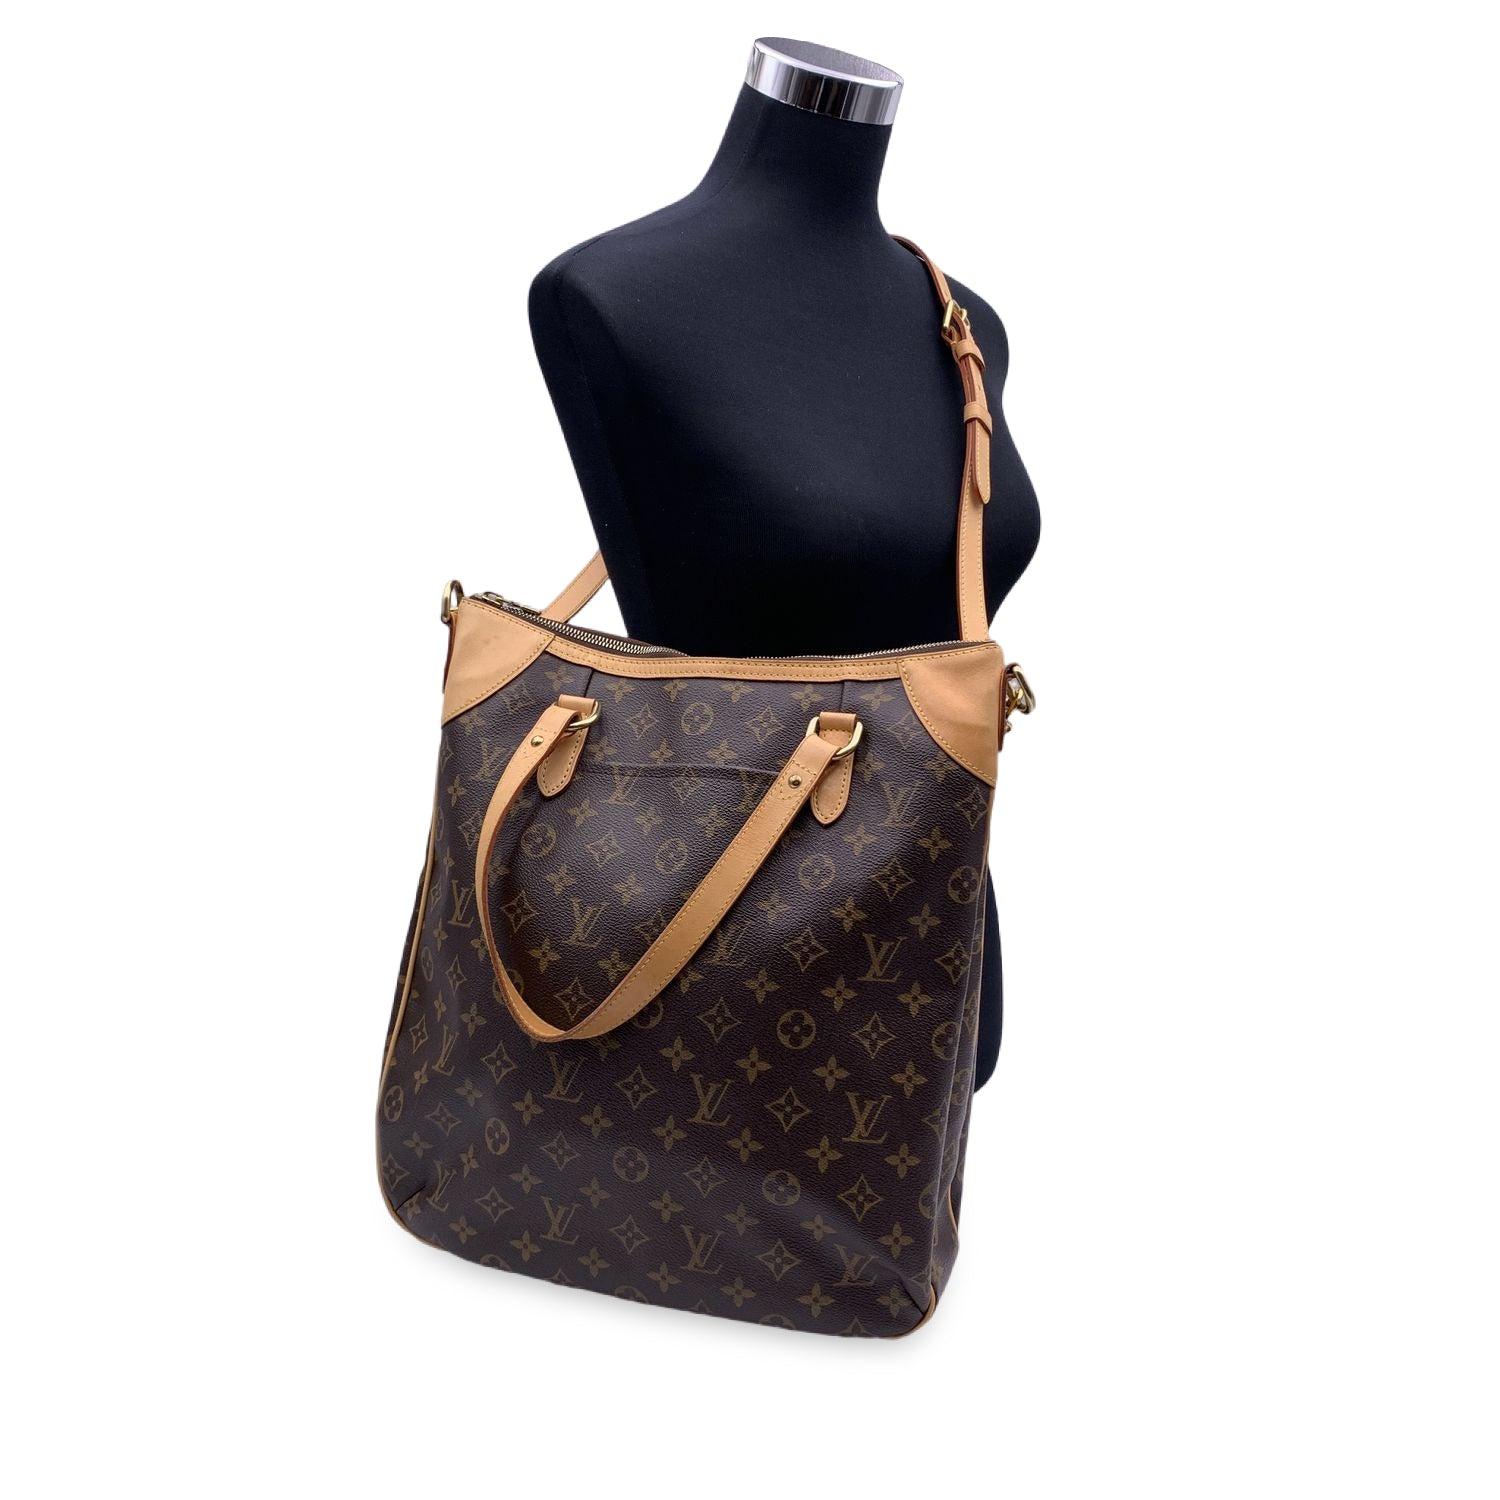 LOUIS VUITTON 'ODEON GM' Tote shoulder bag. Designed with timeless LV monogram canvas and accented with tan leather and gold-tone hardware. Zipper top closure. Features double handles and removable and adjustable shoulder strap. Brown canvas lining.